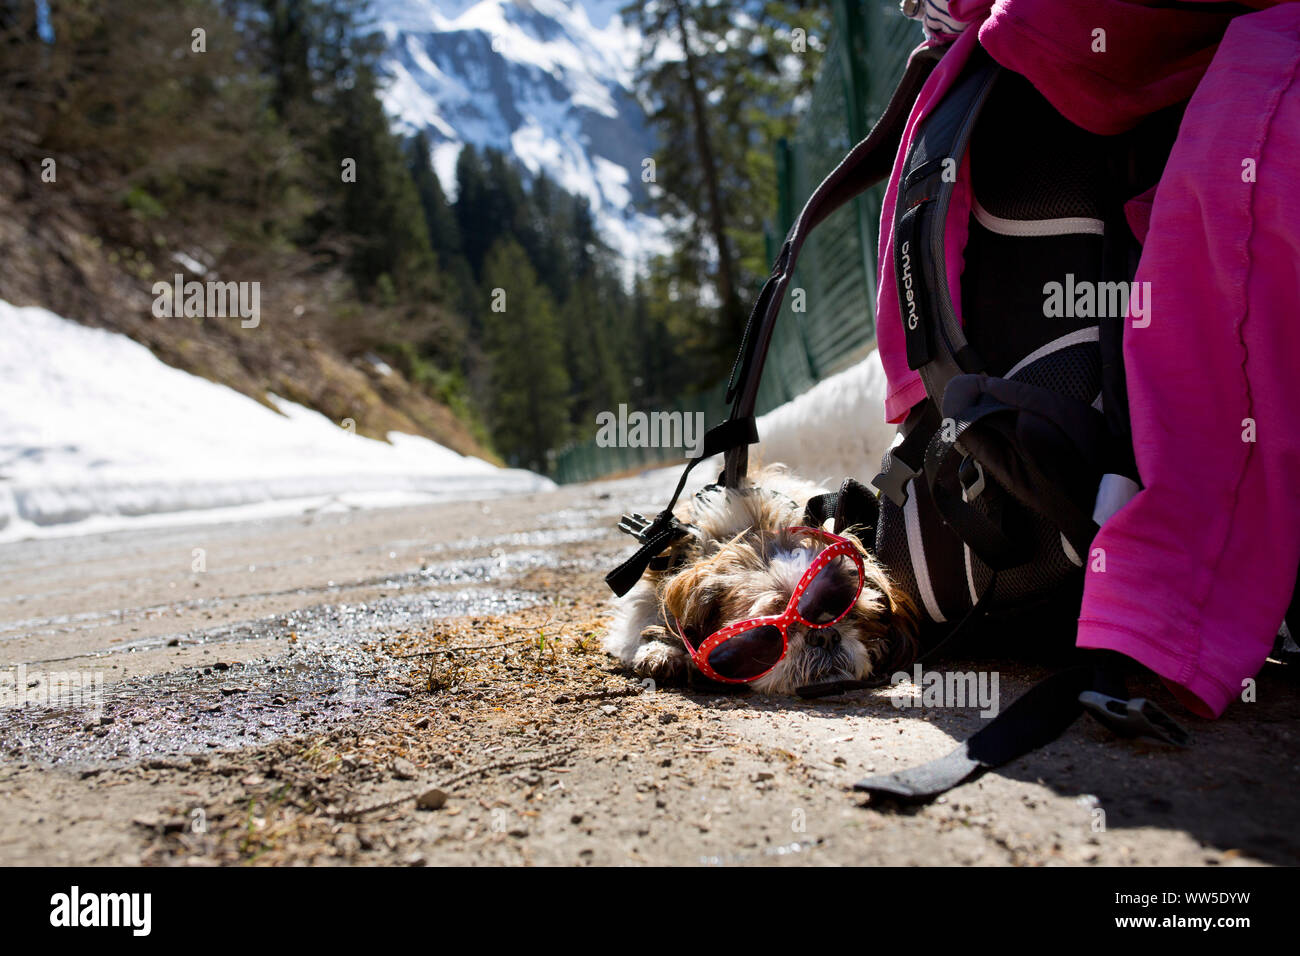 Shih Tzu dog with sunglasses lying exhausted beside luggage on a mountain road Stock Photo